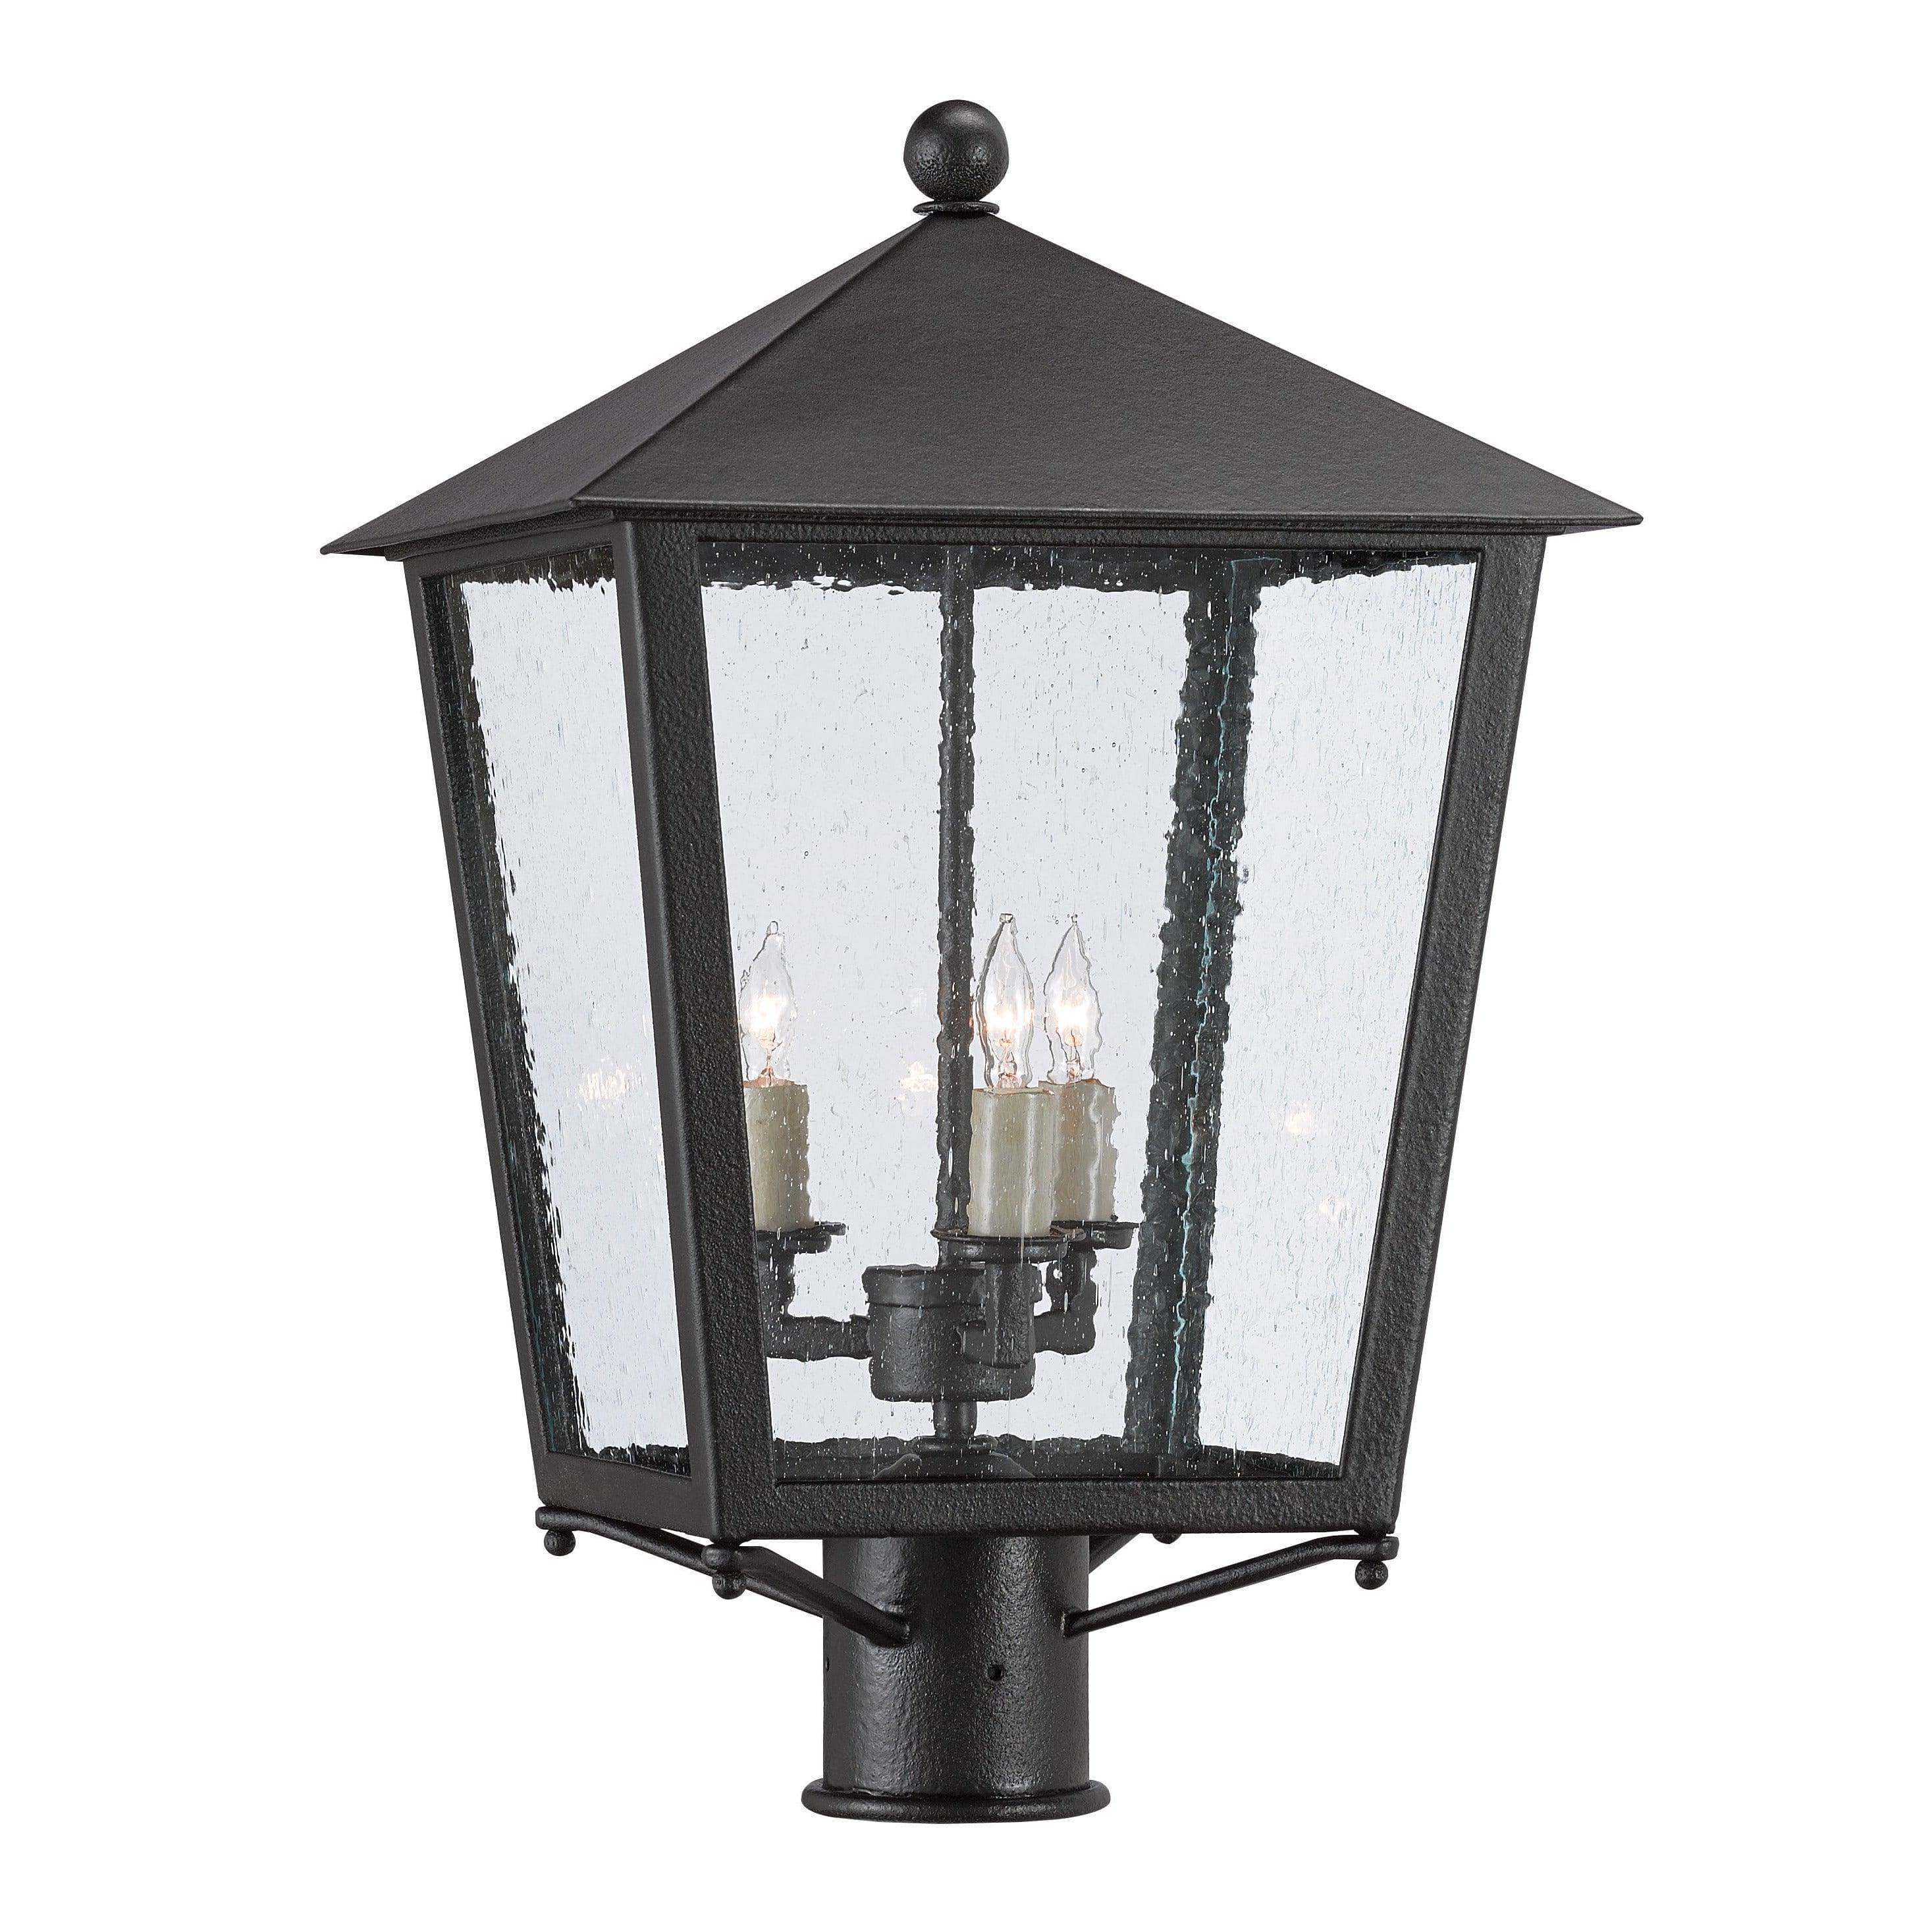 Currey and Company - Bening Post Mount - 9600-0005 | Montreal Lighting & Hardware